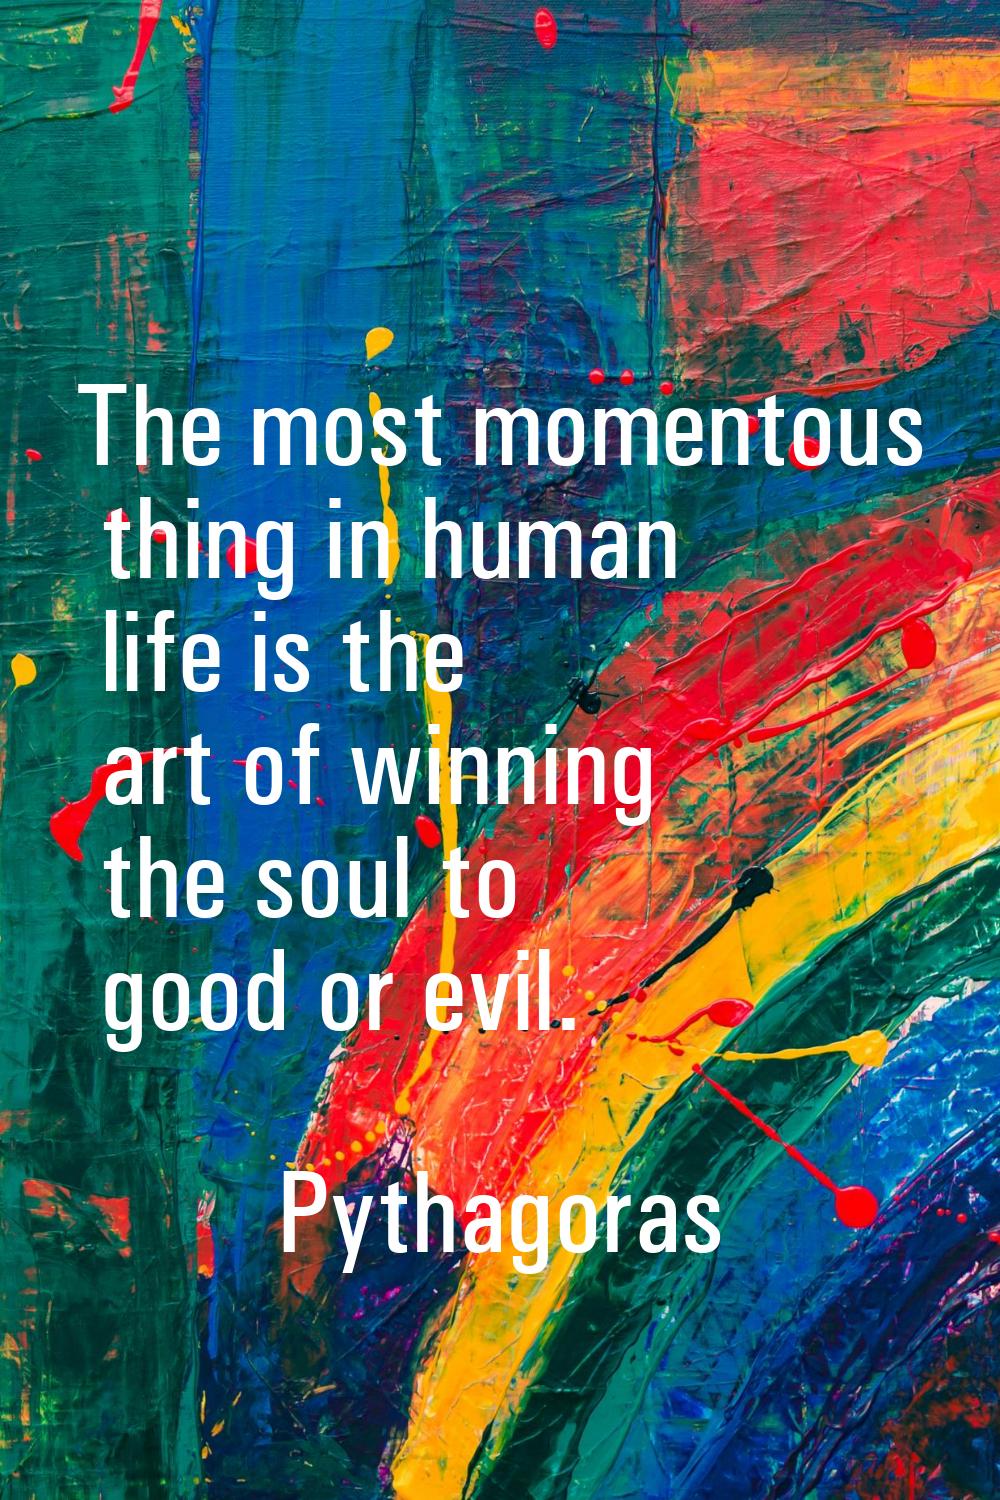 The most momentous thing in human life is the art of winning the soul to good or evil.